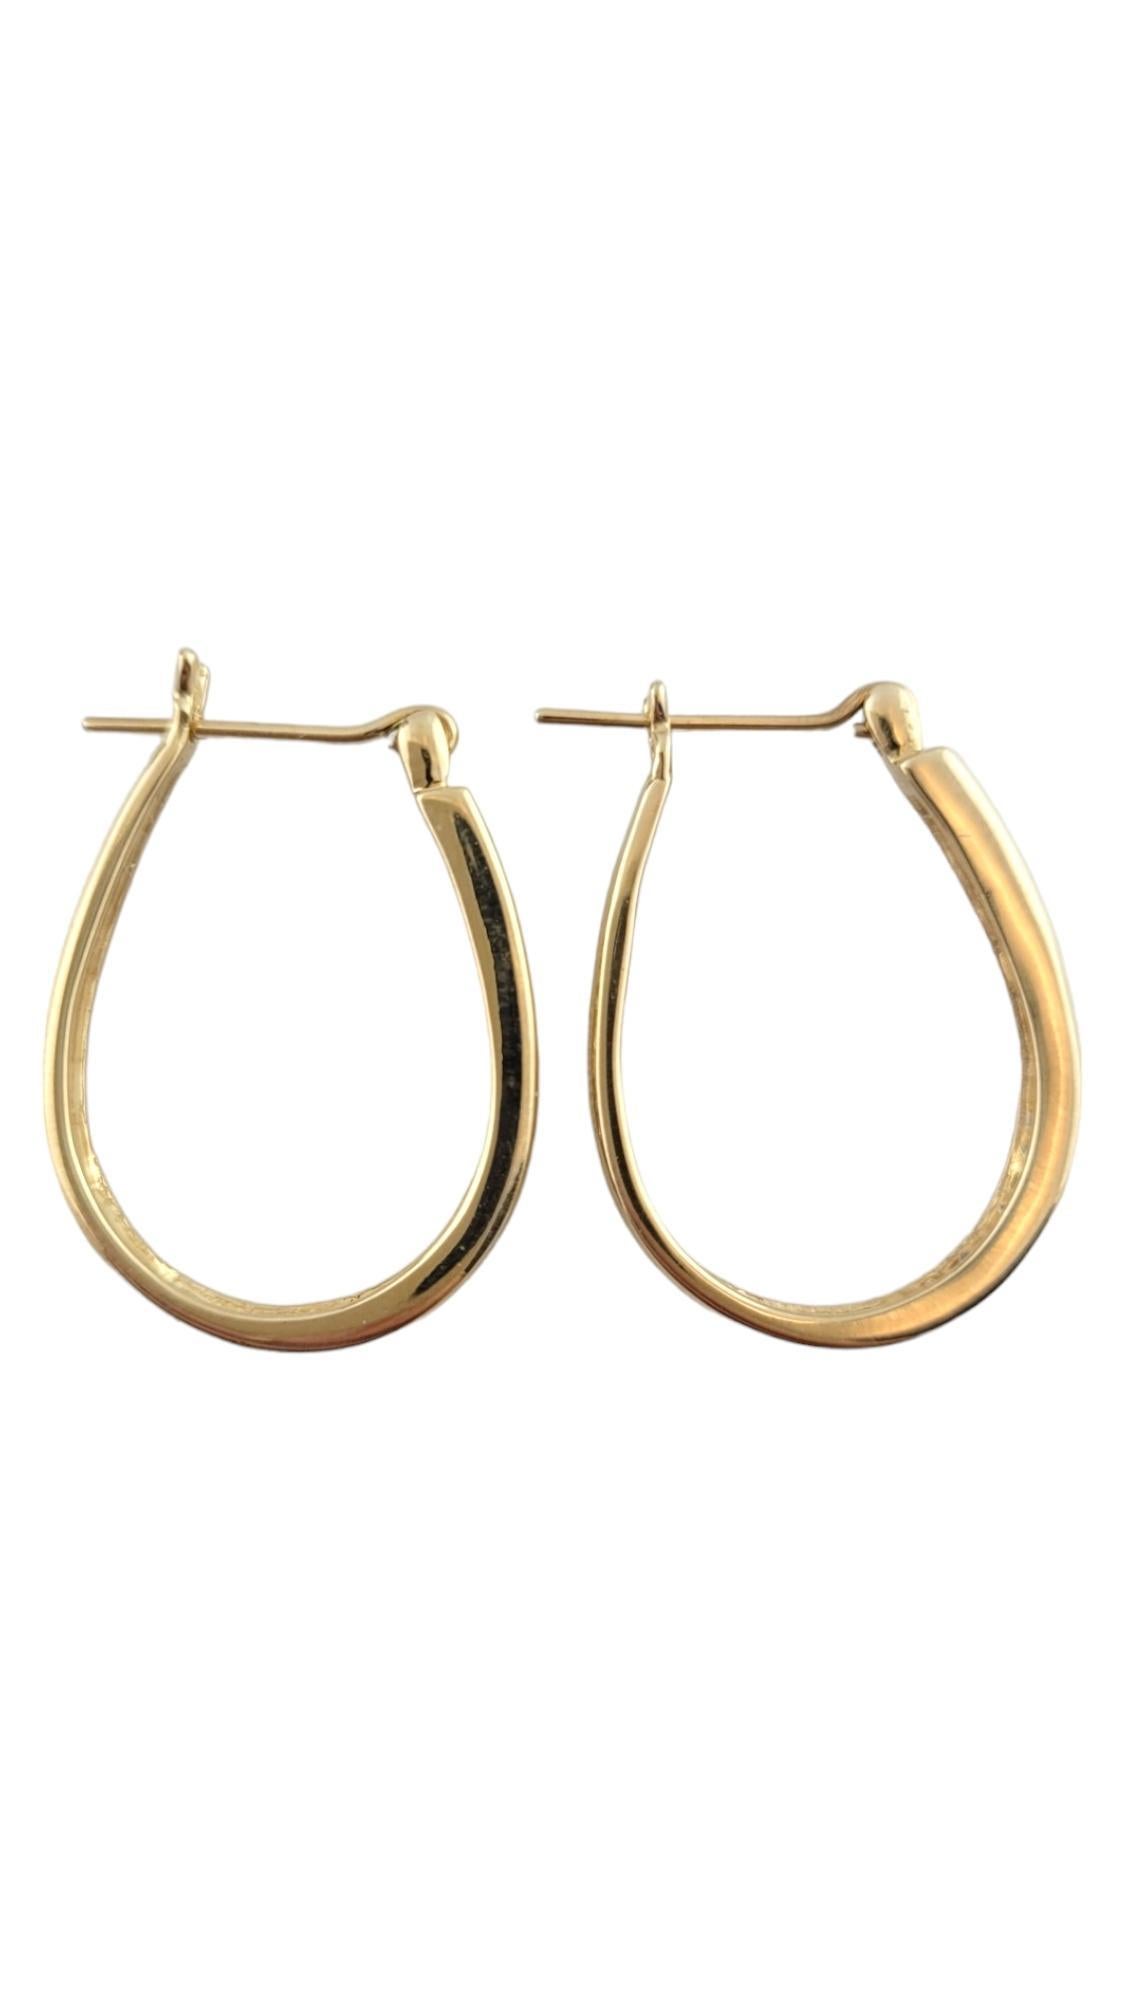 Vintage 14K Yellow Gold Oval Diamond Hoops

This gorgeous set of oval hoop earrings are crafted form 14K yellow gold and have 16 sparkling round brilliant cut diamonds!

Approximate total diamond weight: .80 cts

Diamond color: I

Diamond clarity: